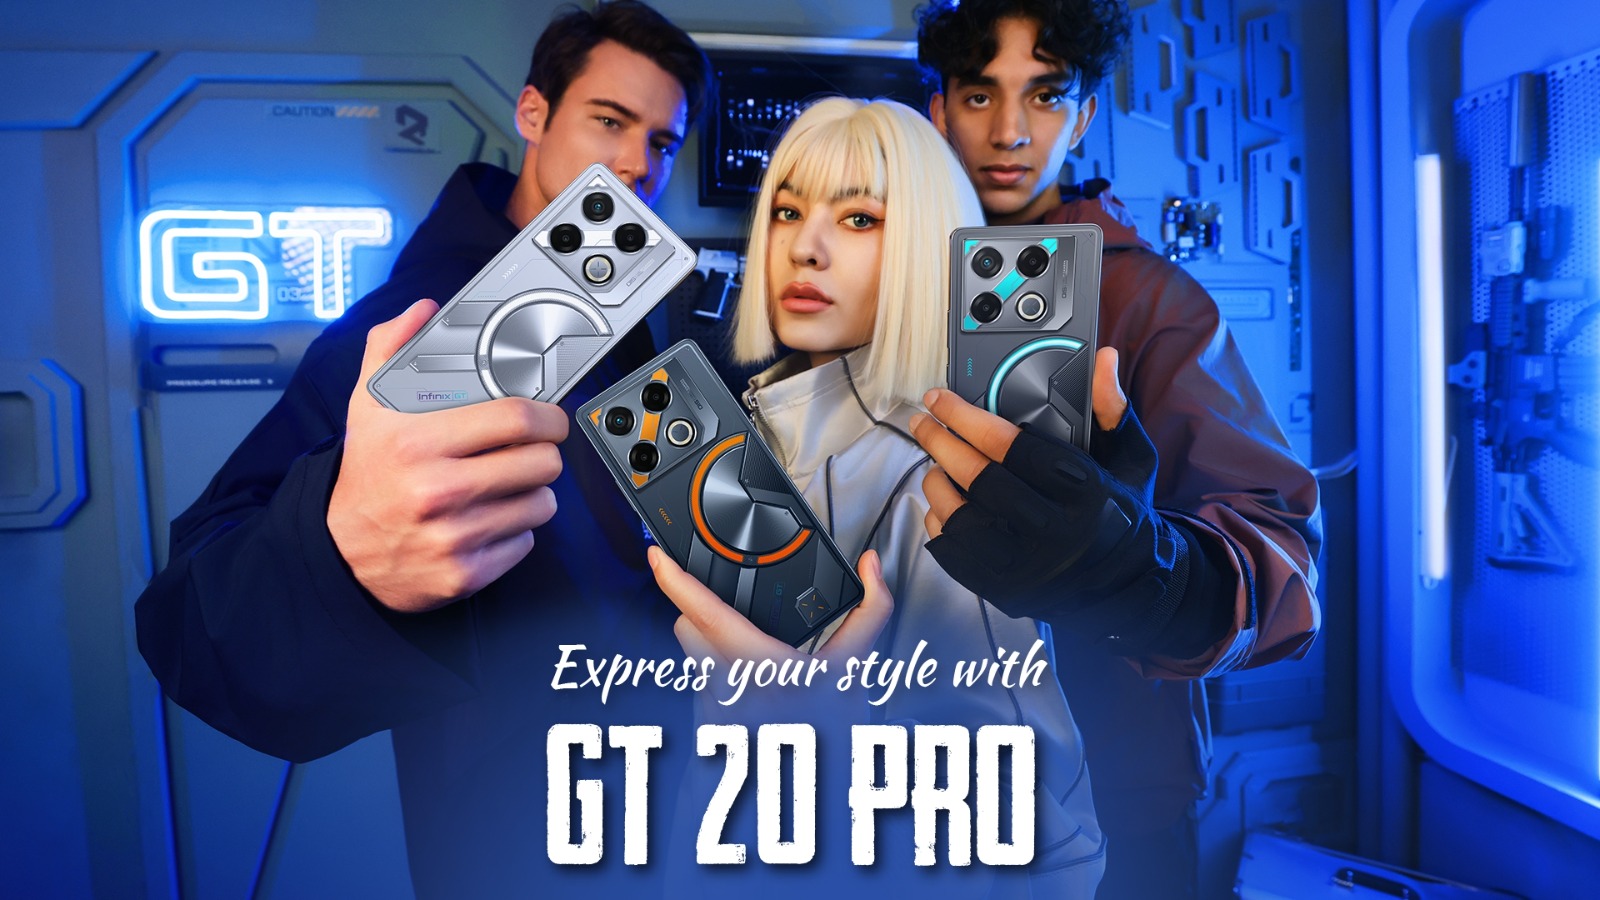 Tech Meets Trend: Infinix GT 20 Pro, the Gamer’s Fashion Statement